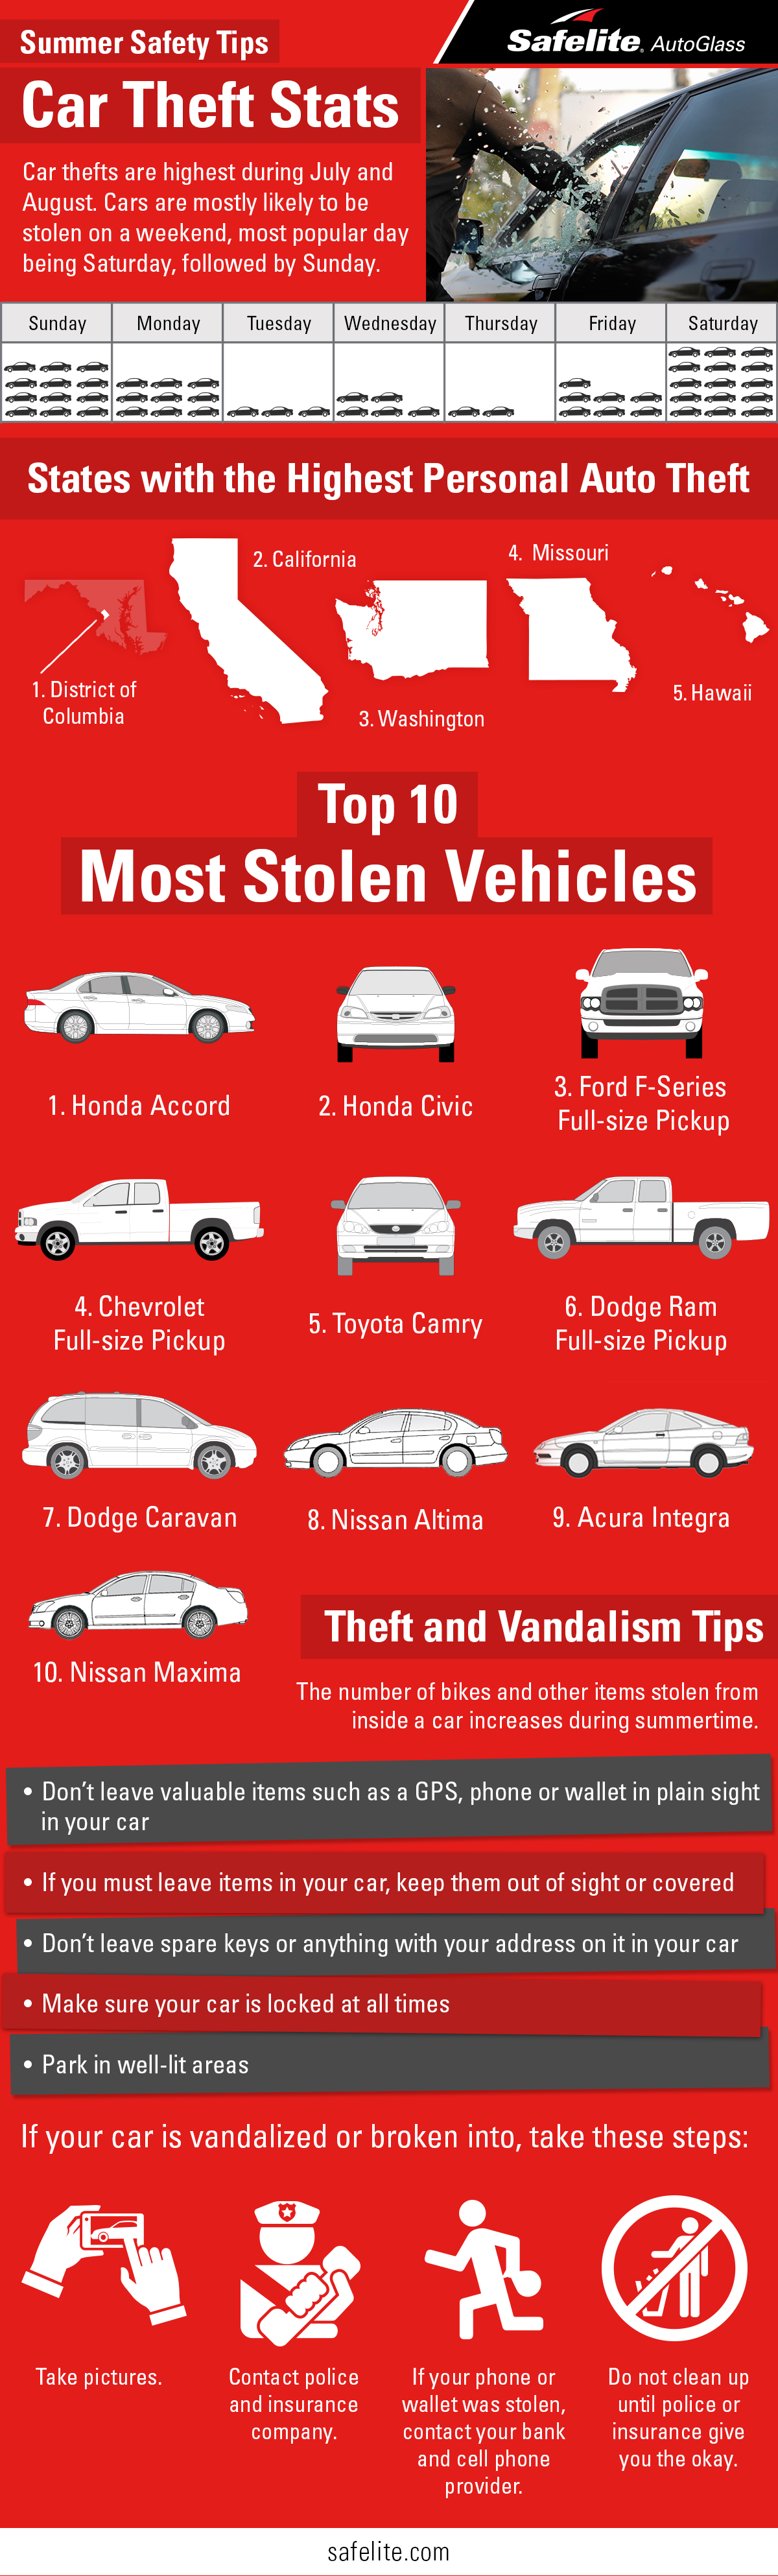 The number of stolen cars and vandalism increases during the summer months. Check out our infographic and tips to get help if you find yourself the victim of theft or vandalism.